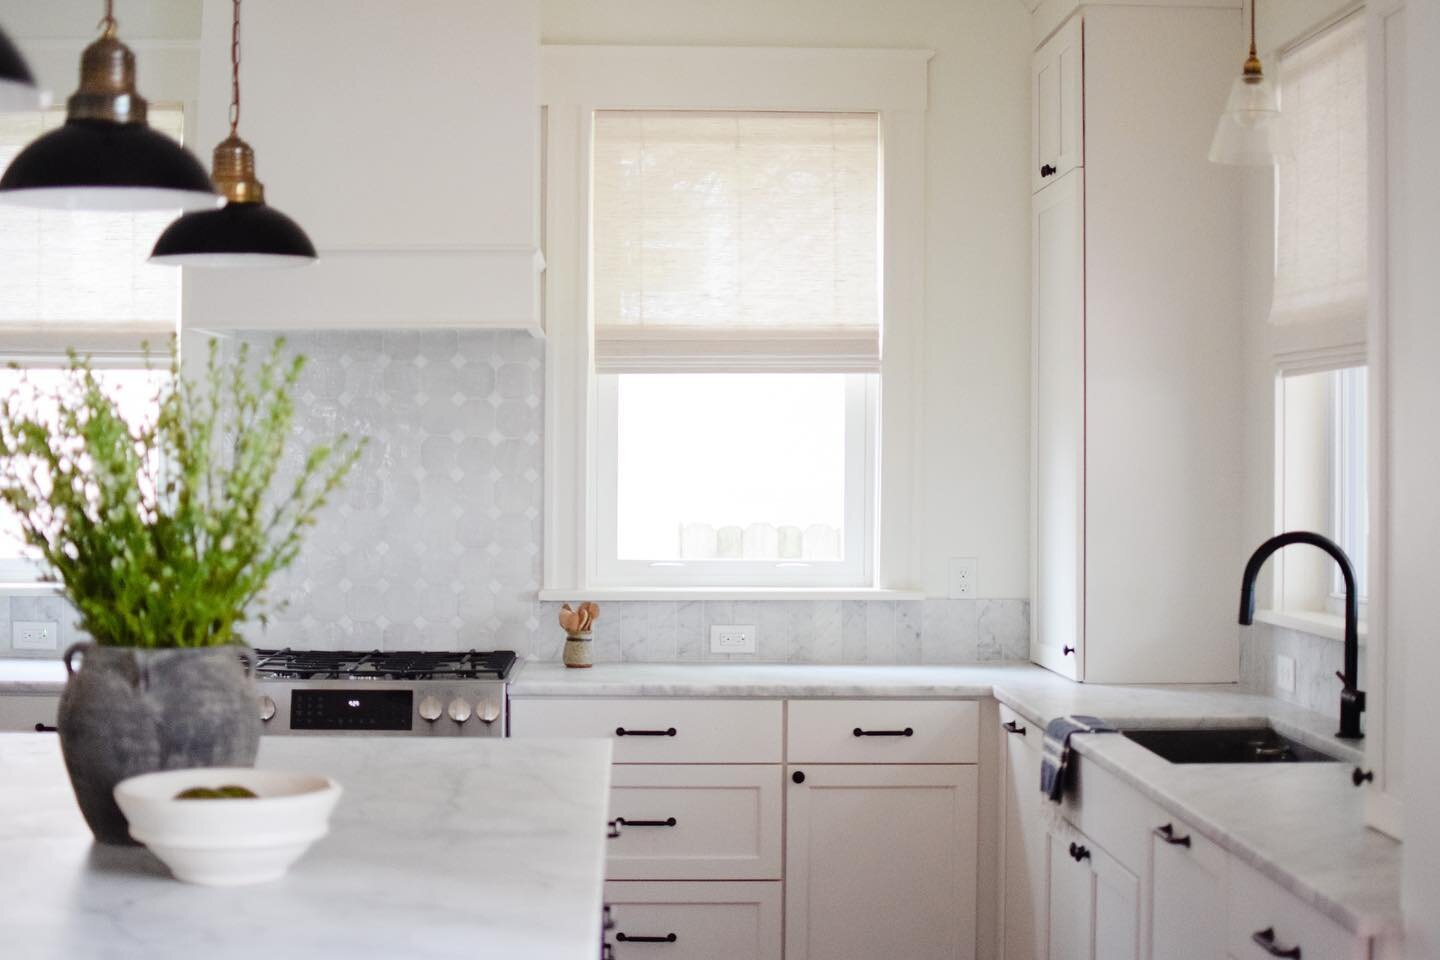 A bright and airy kitchen that was part of an addition to this early 1900s home.
&mdash;
#kitchendesign #kitchen #kitchenremodel #kitchendecor #kitchencabinets #kitchenisland #whitekitchen #interiordesign #interiordesigner #interiordecorating #home #